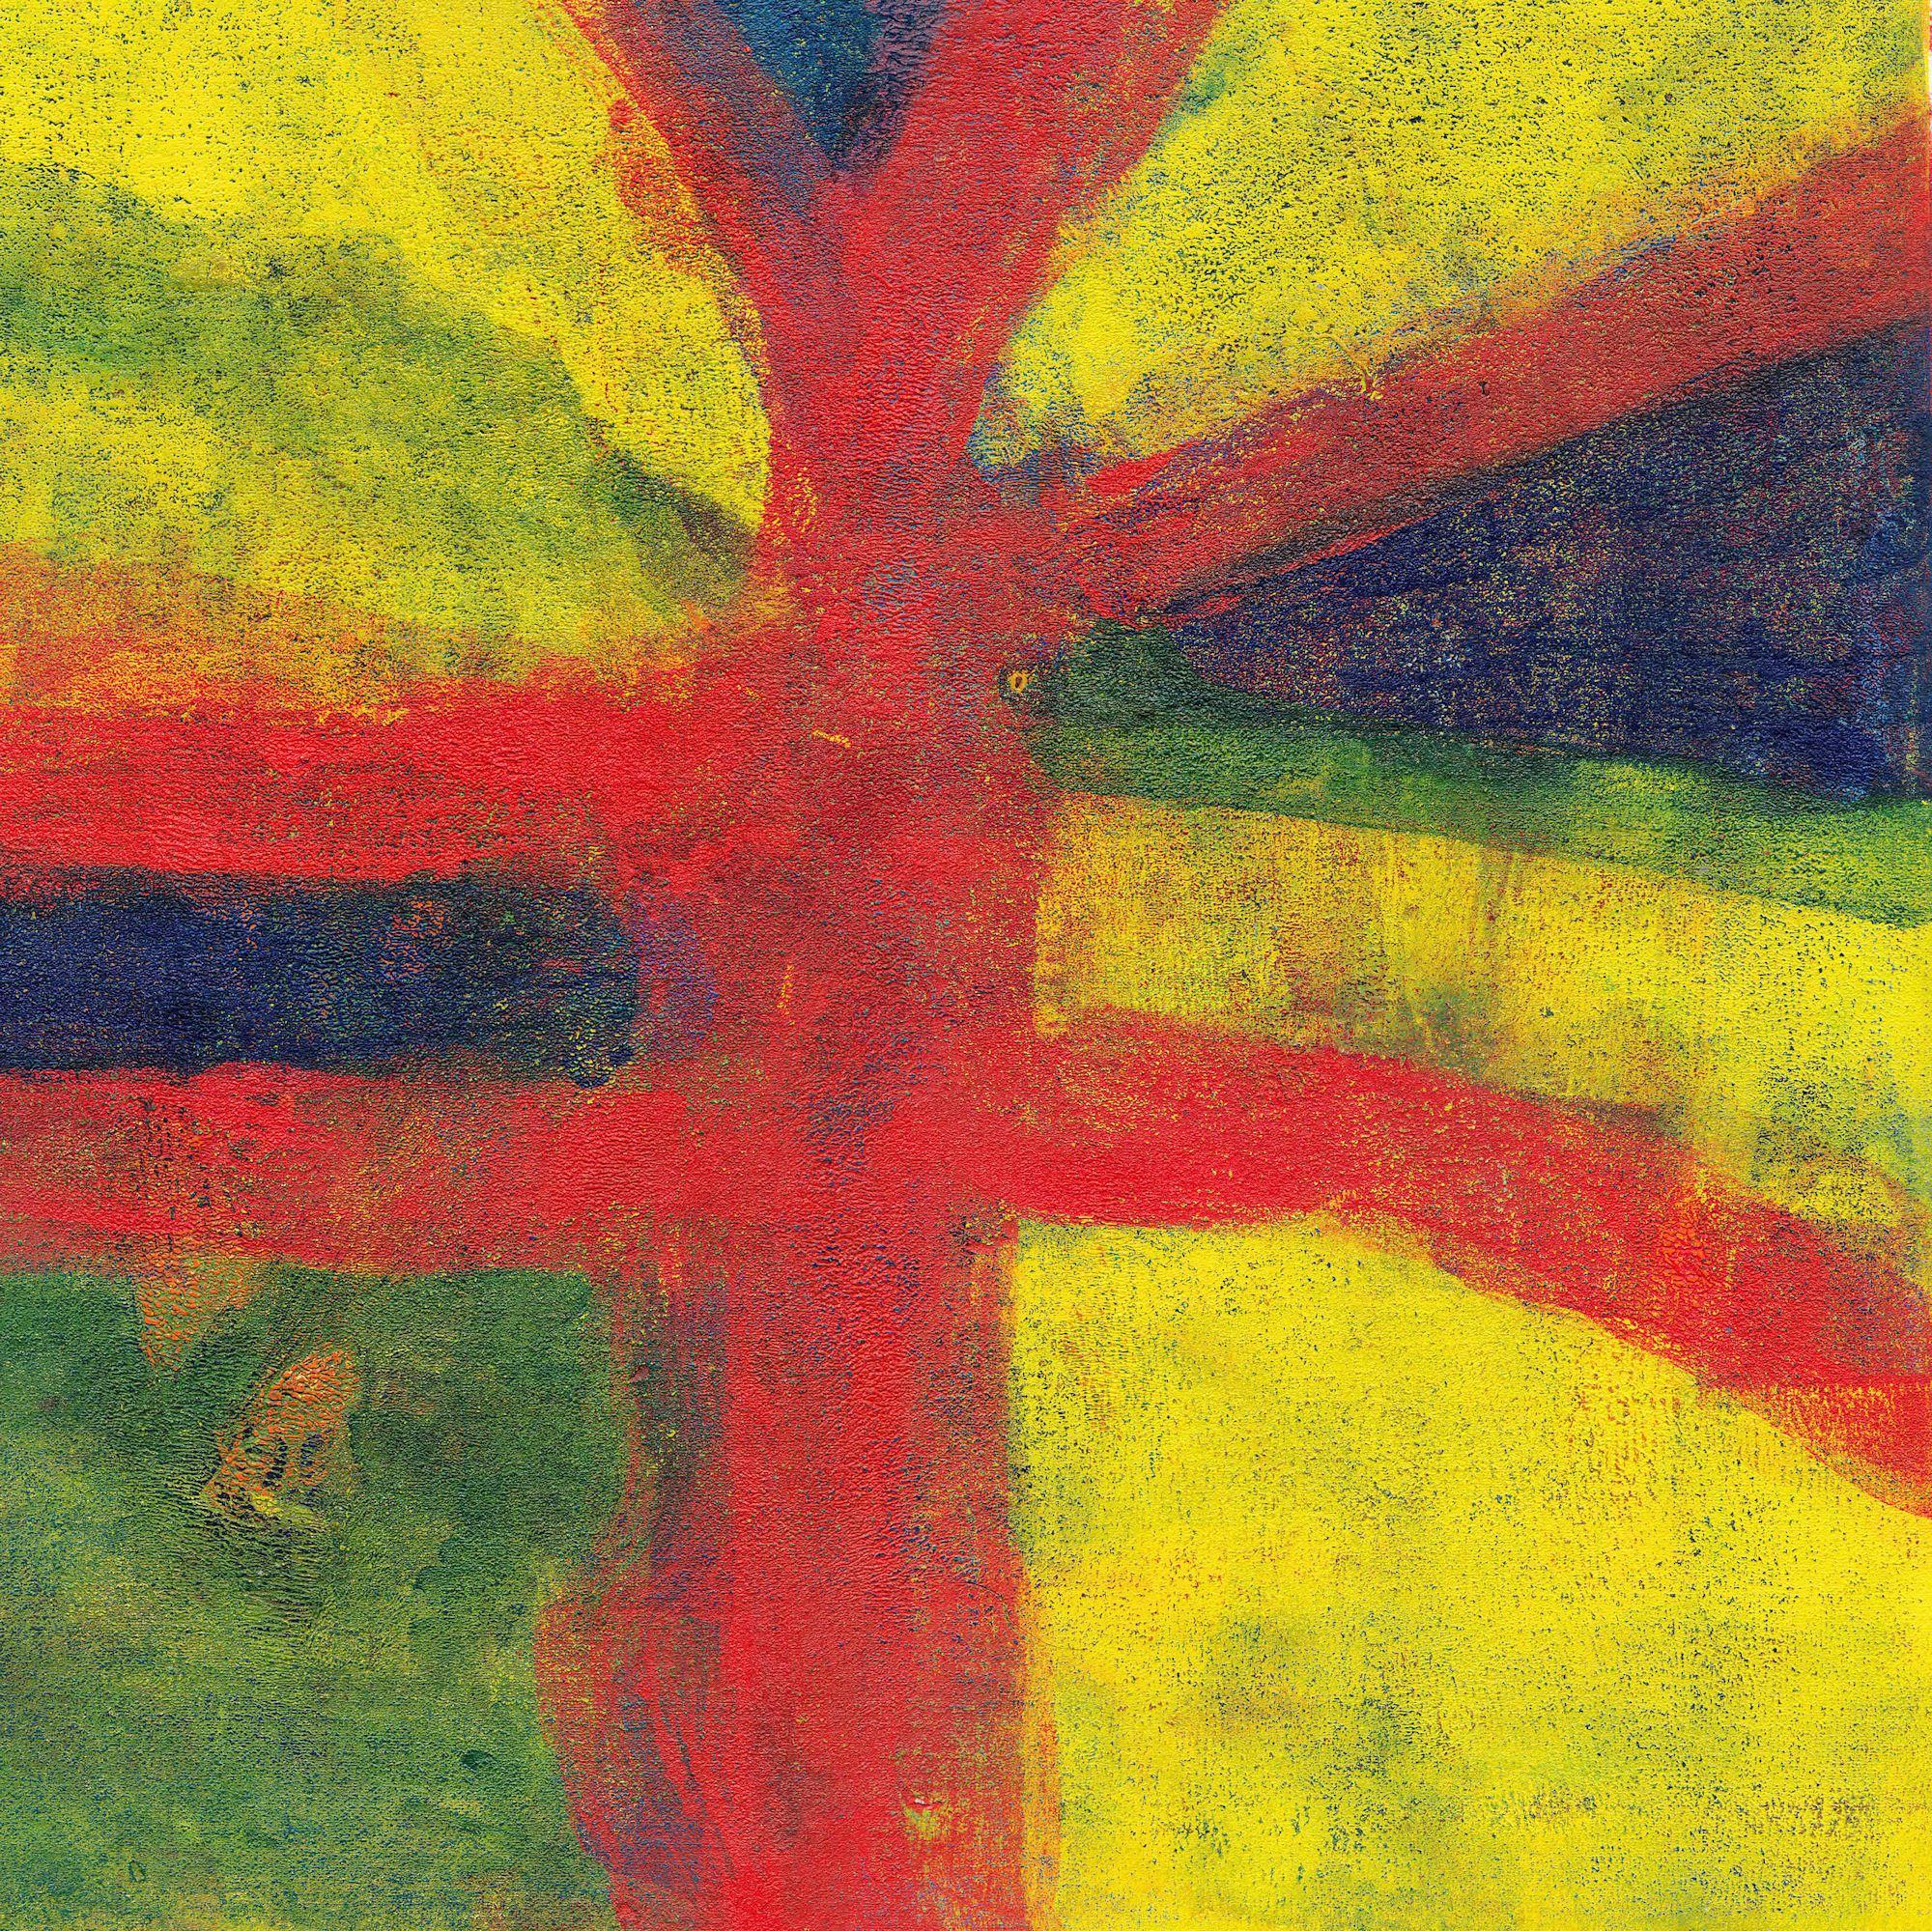 monotype print in red, yellow and green derived from the concept of a flag